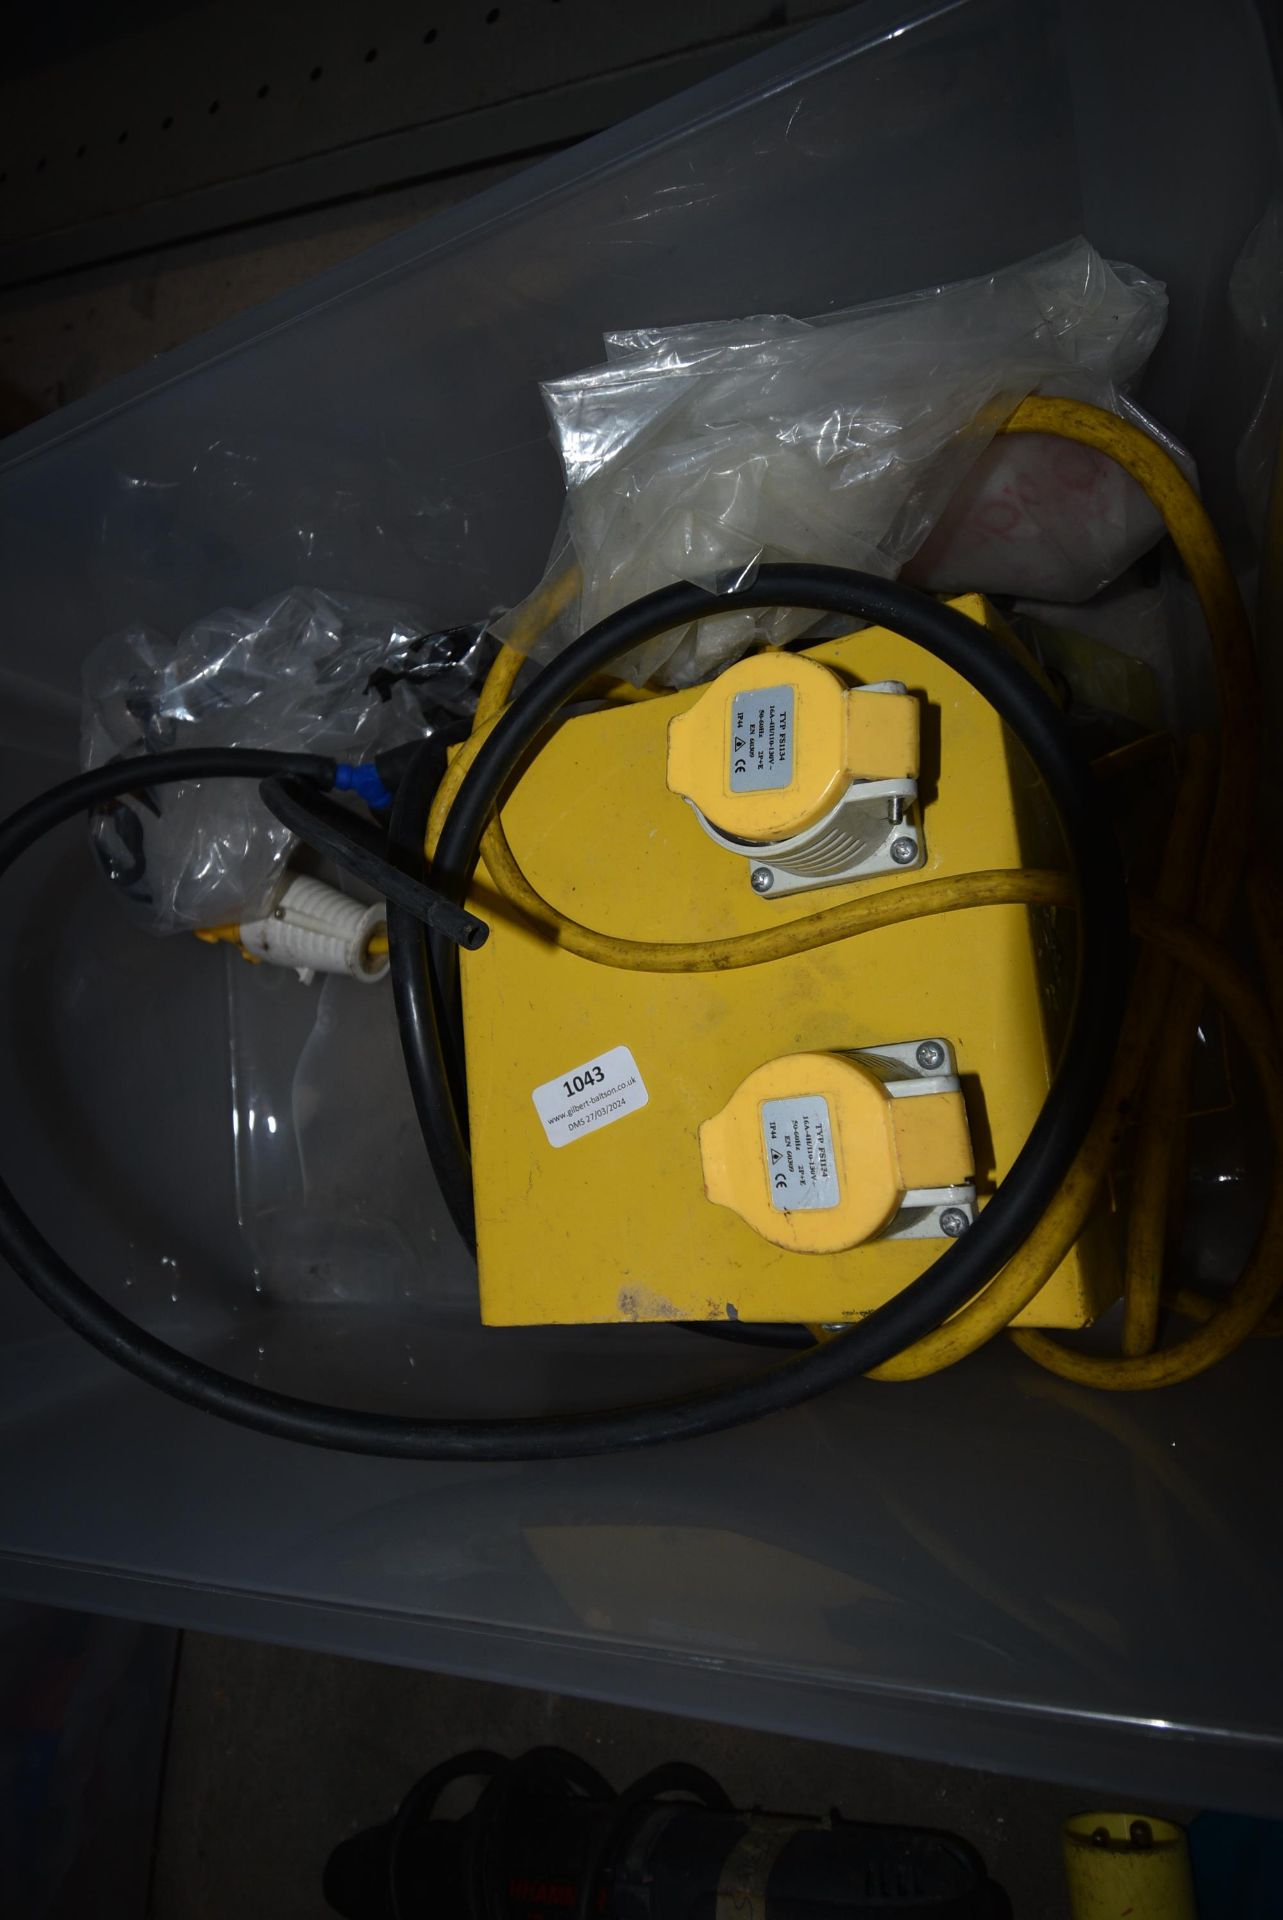 *110v Four-Way Splitter (Location: 64 King Edward St, Grimsby, DN31 3JP, Viewing Tuesday 26th,